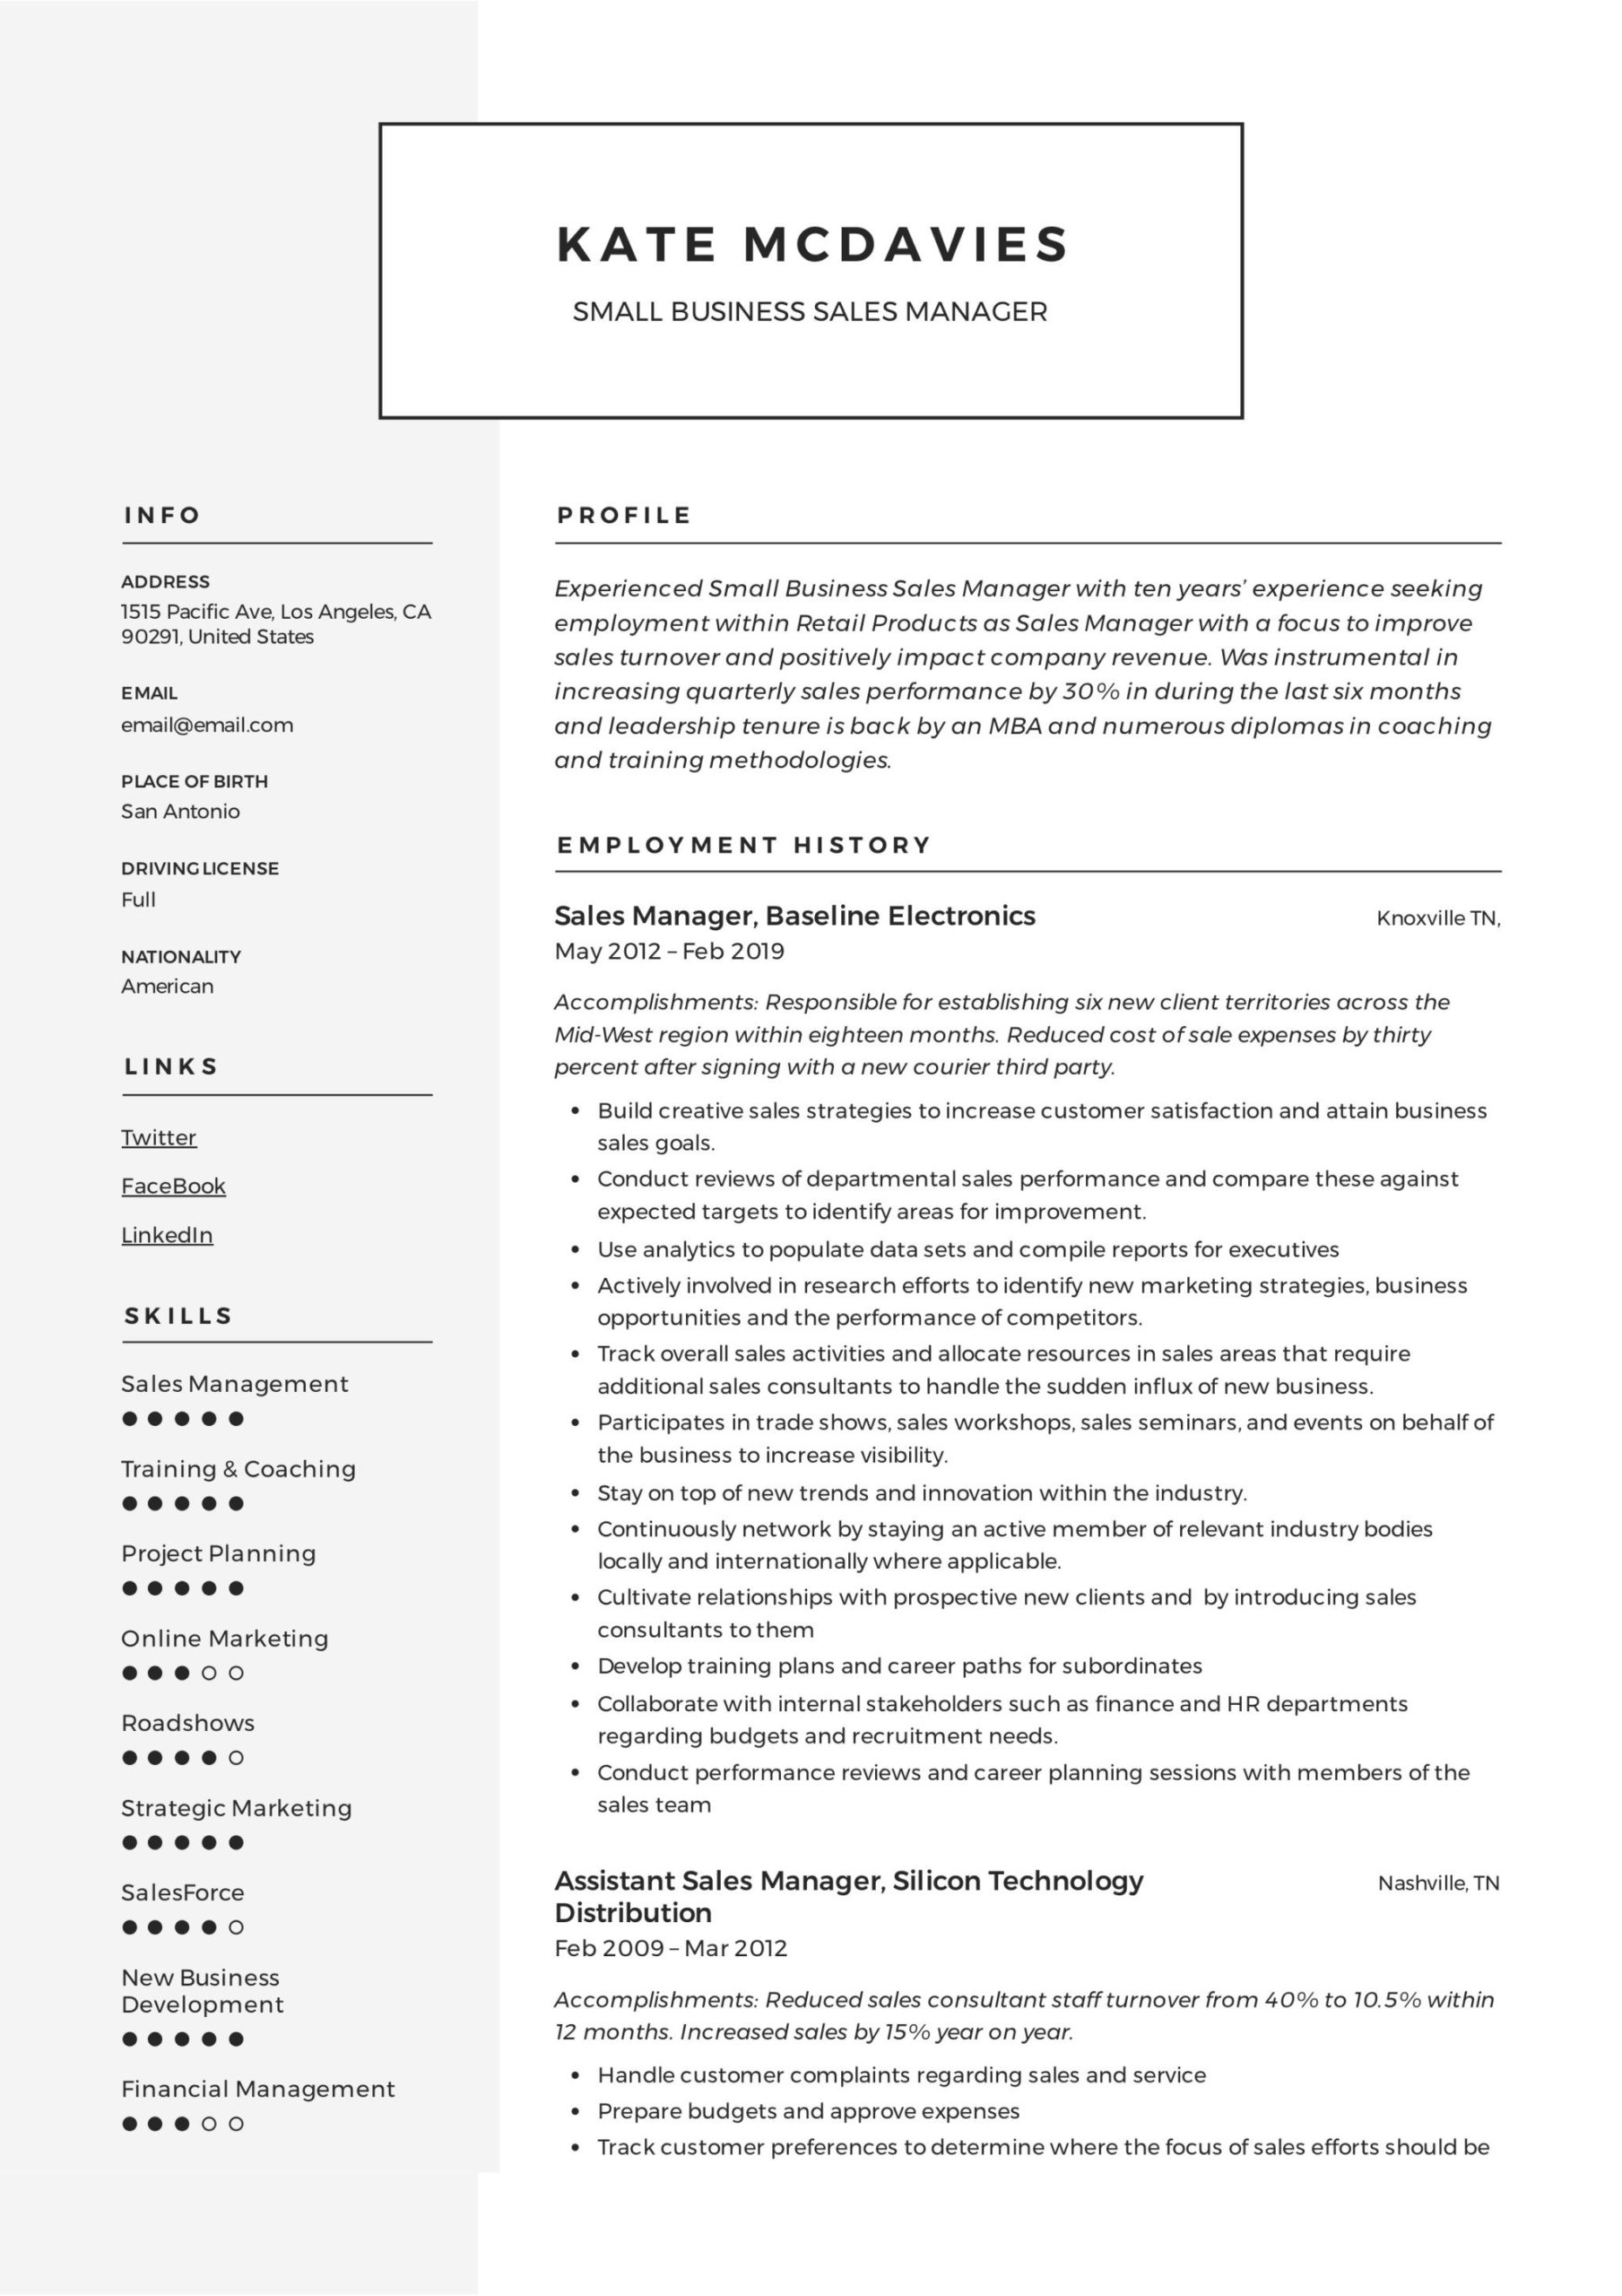 Outside Catering Sales Manager Resume Sample Guide: Small Business Sales Manager Resume [x12] Sample Pdf 2020